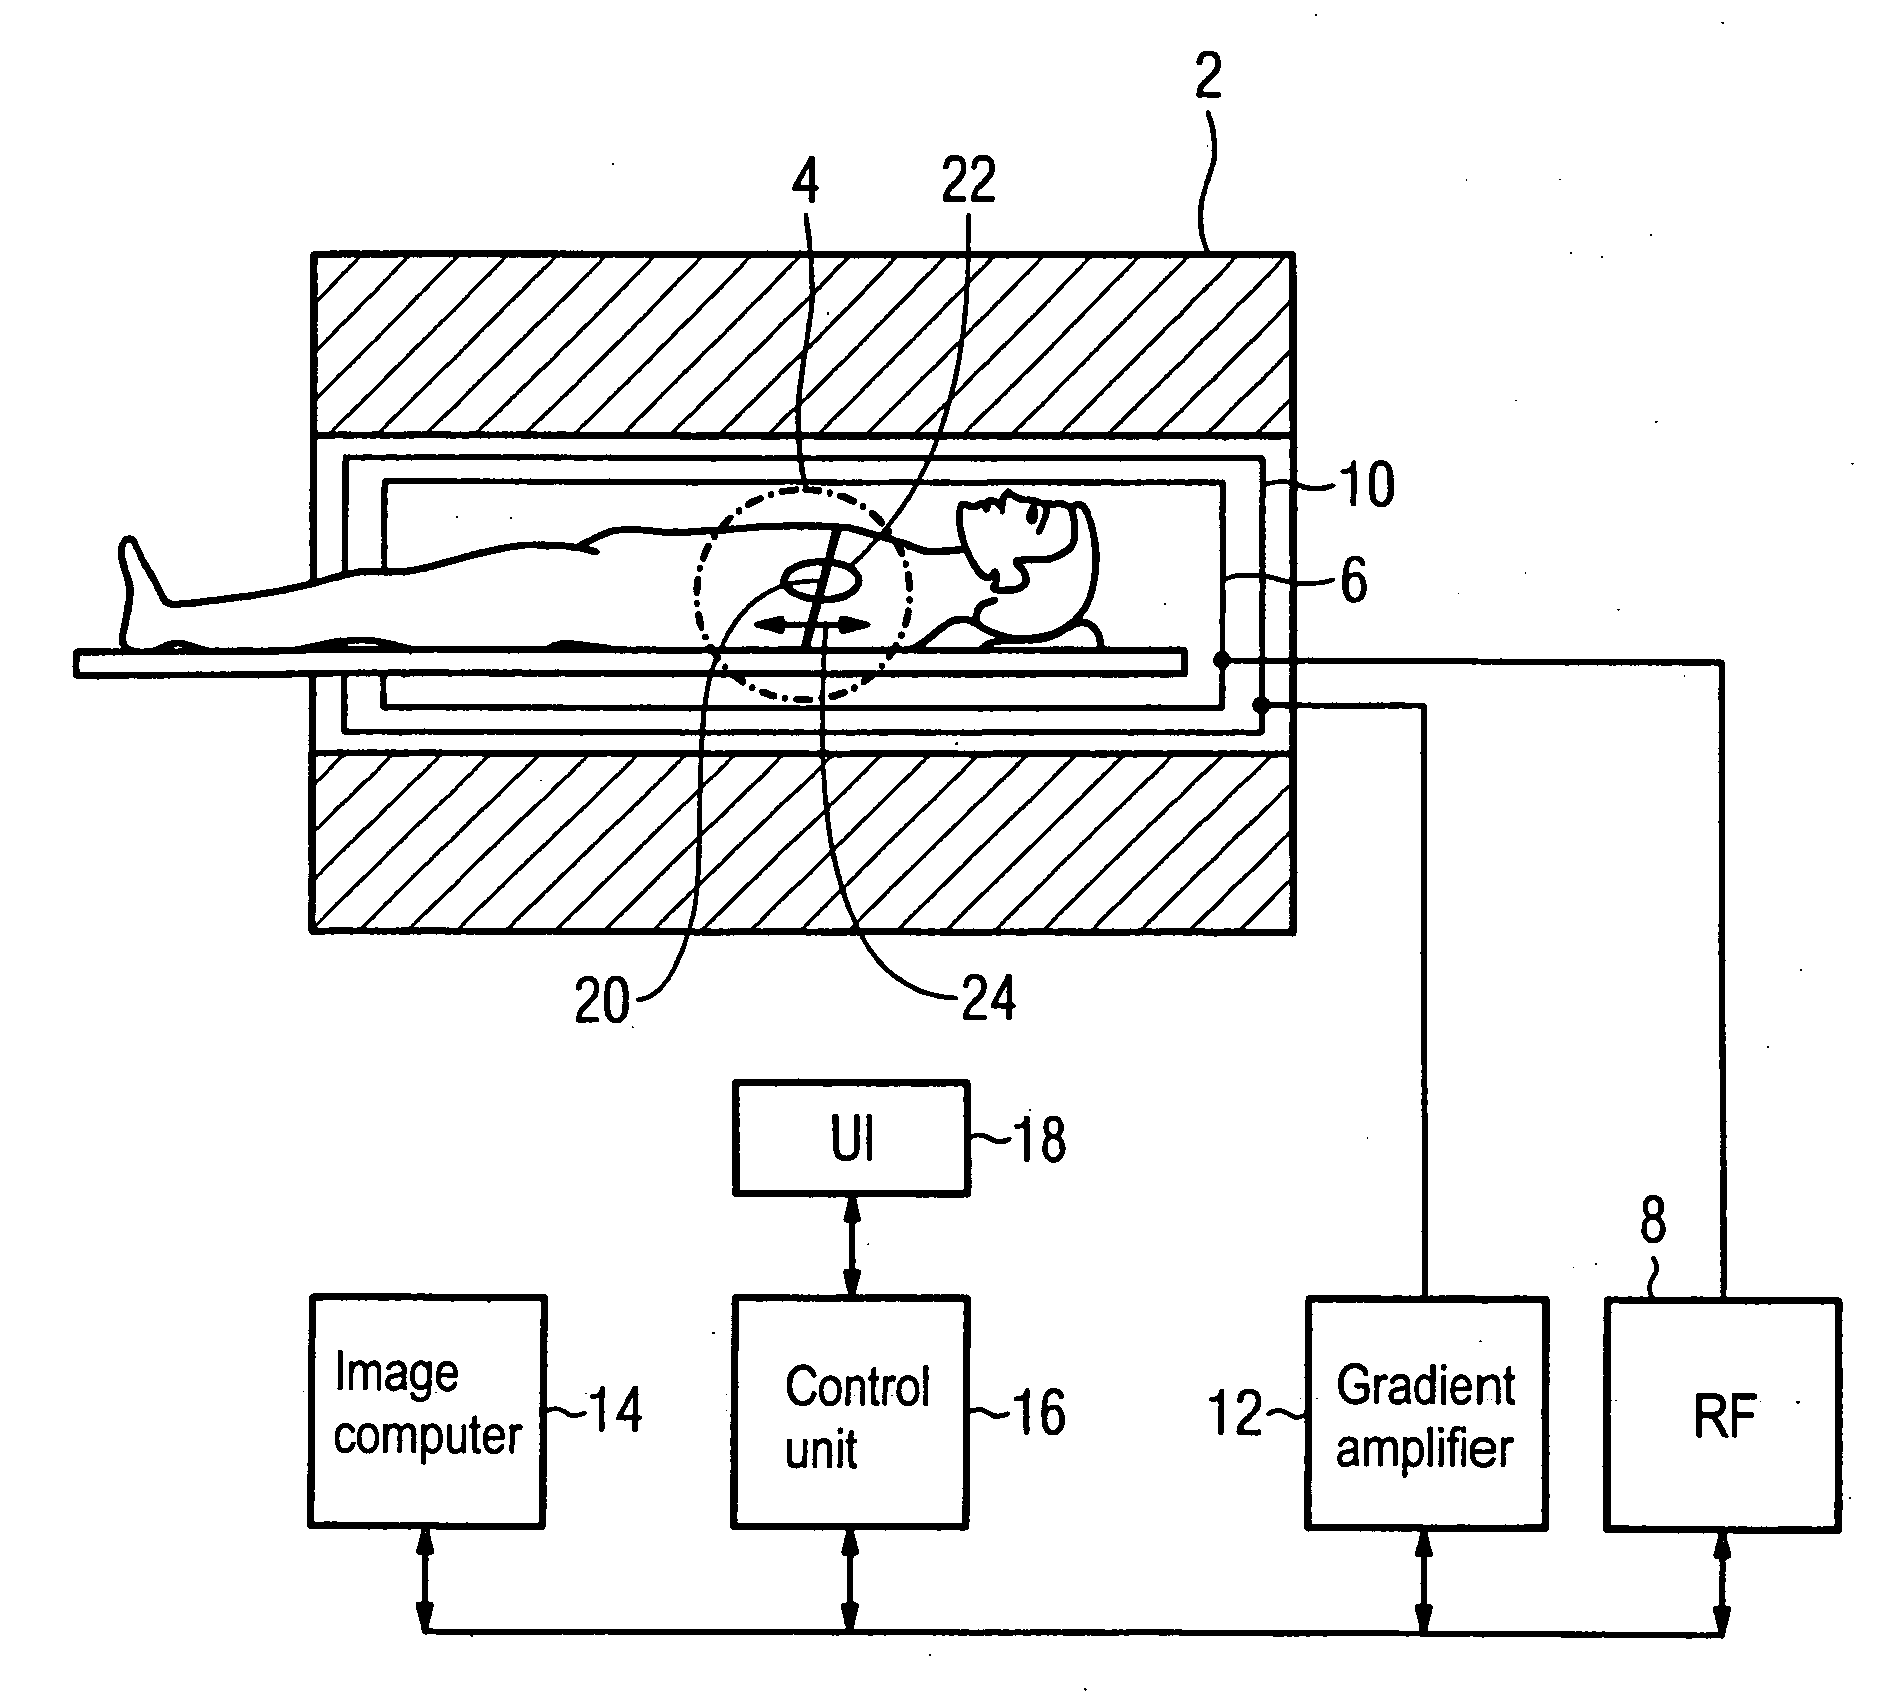 Method for imaging of a periodically-moving subject region of a subject